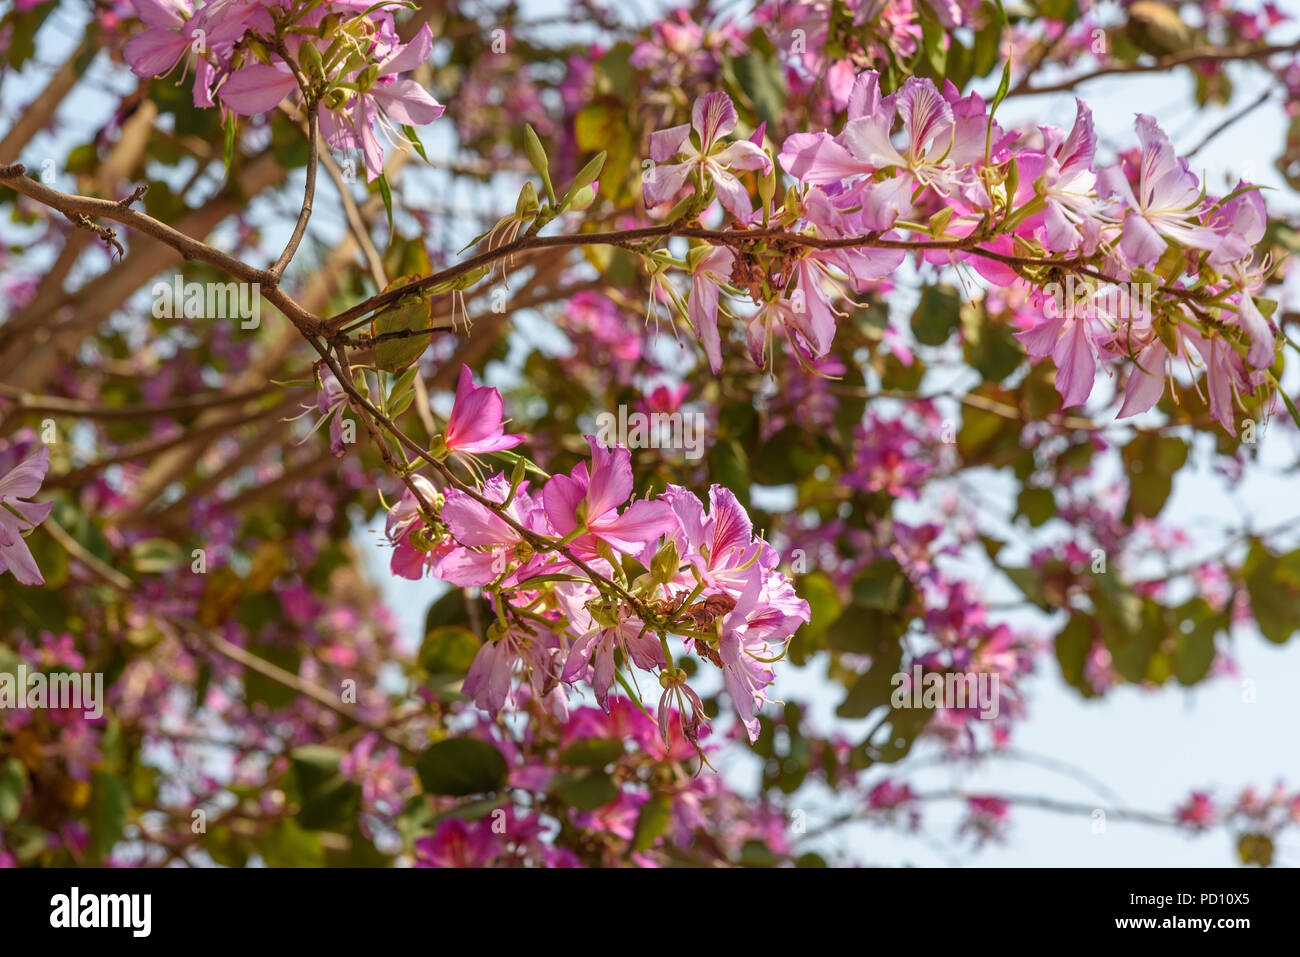 Pink flowers Bauhinia. Orchid tree blooming in springtime Stock Photo